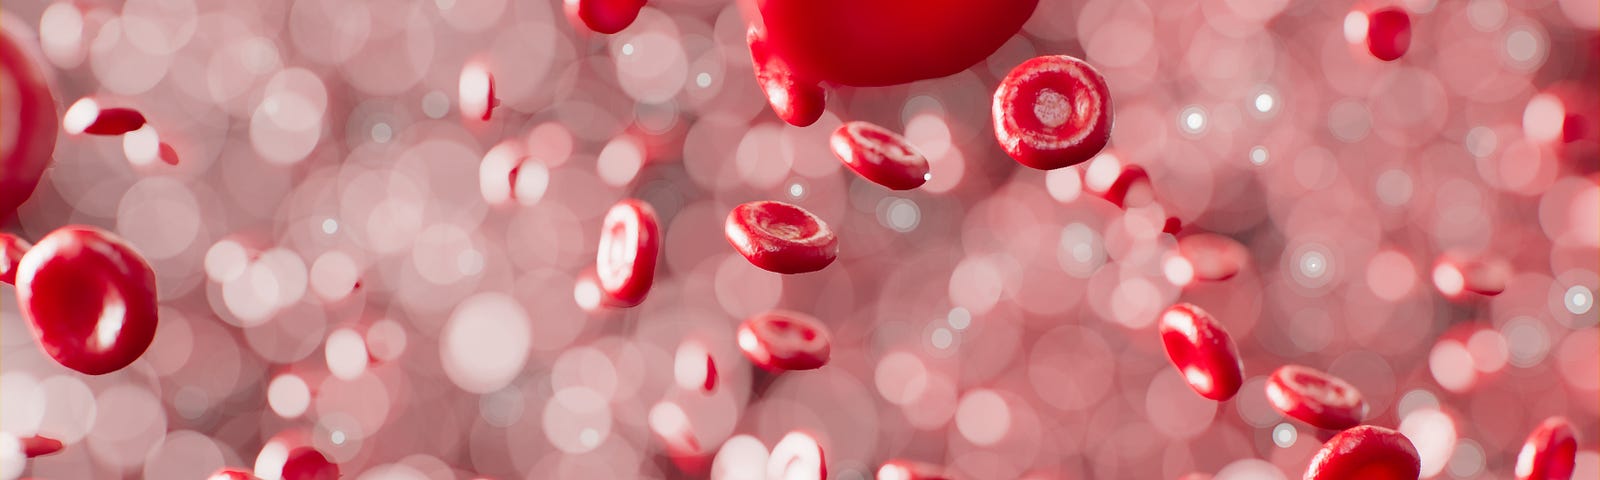 Red blood cells floating in image.